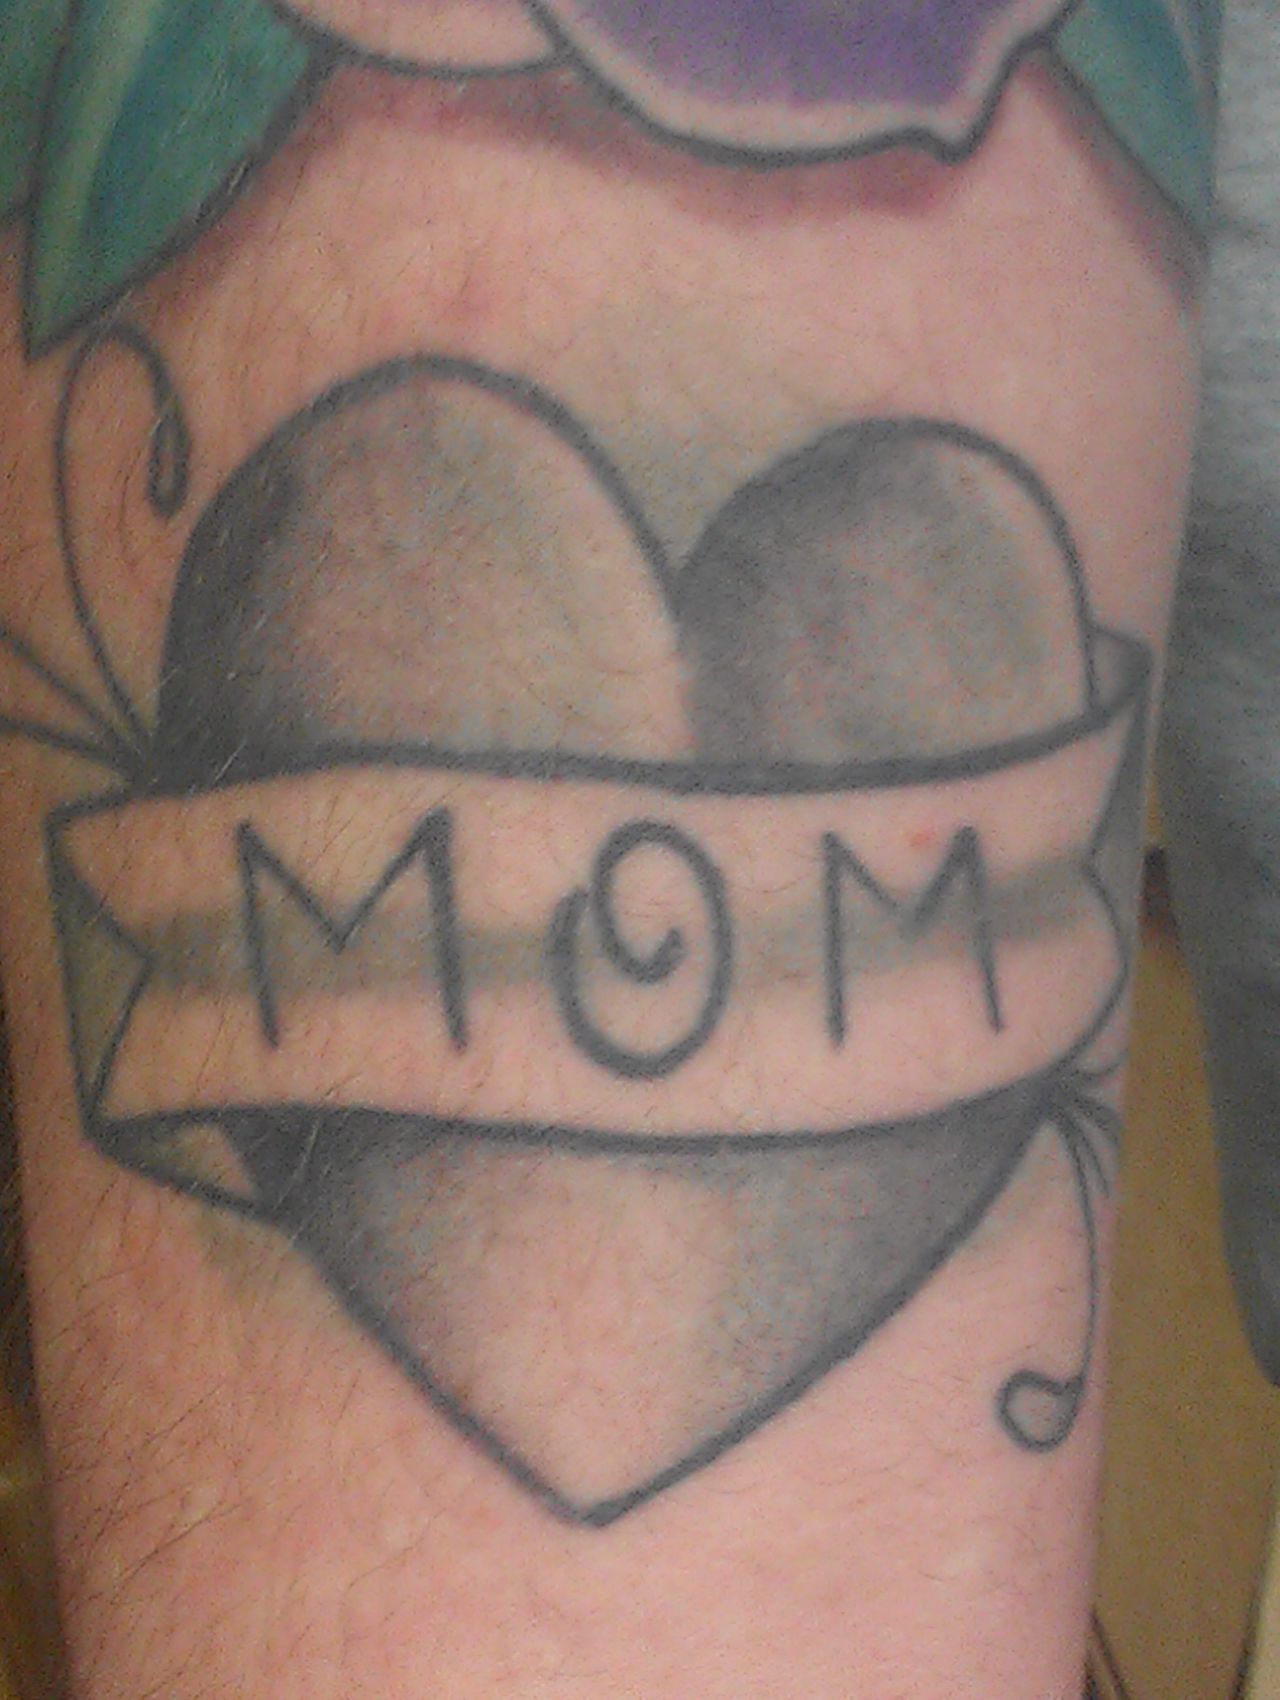 Emily's husband Robert Kirouac also has a mom tattoo on his arm. His mom said that if he was going to get a tattoo, <a href="http://ireport.cnn.com/docs/DOC-967021">he had to get a "mom" one</a>. Additionally, it had to look like singer Adam Levine's mom tattoo, because "she watches him on 'The Voice' and she thinks he's hot," said Kirouac. This was the result -- compare it with Levine's in the next frame. "I proudly wear my mom tat because it is exactly what she wanted, and I love to keep my mom happy," said Kirouac.